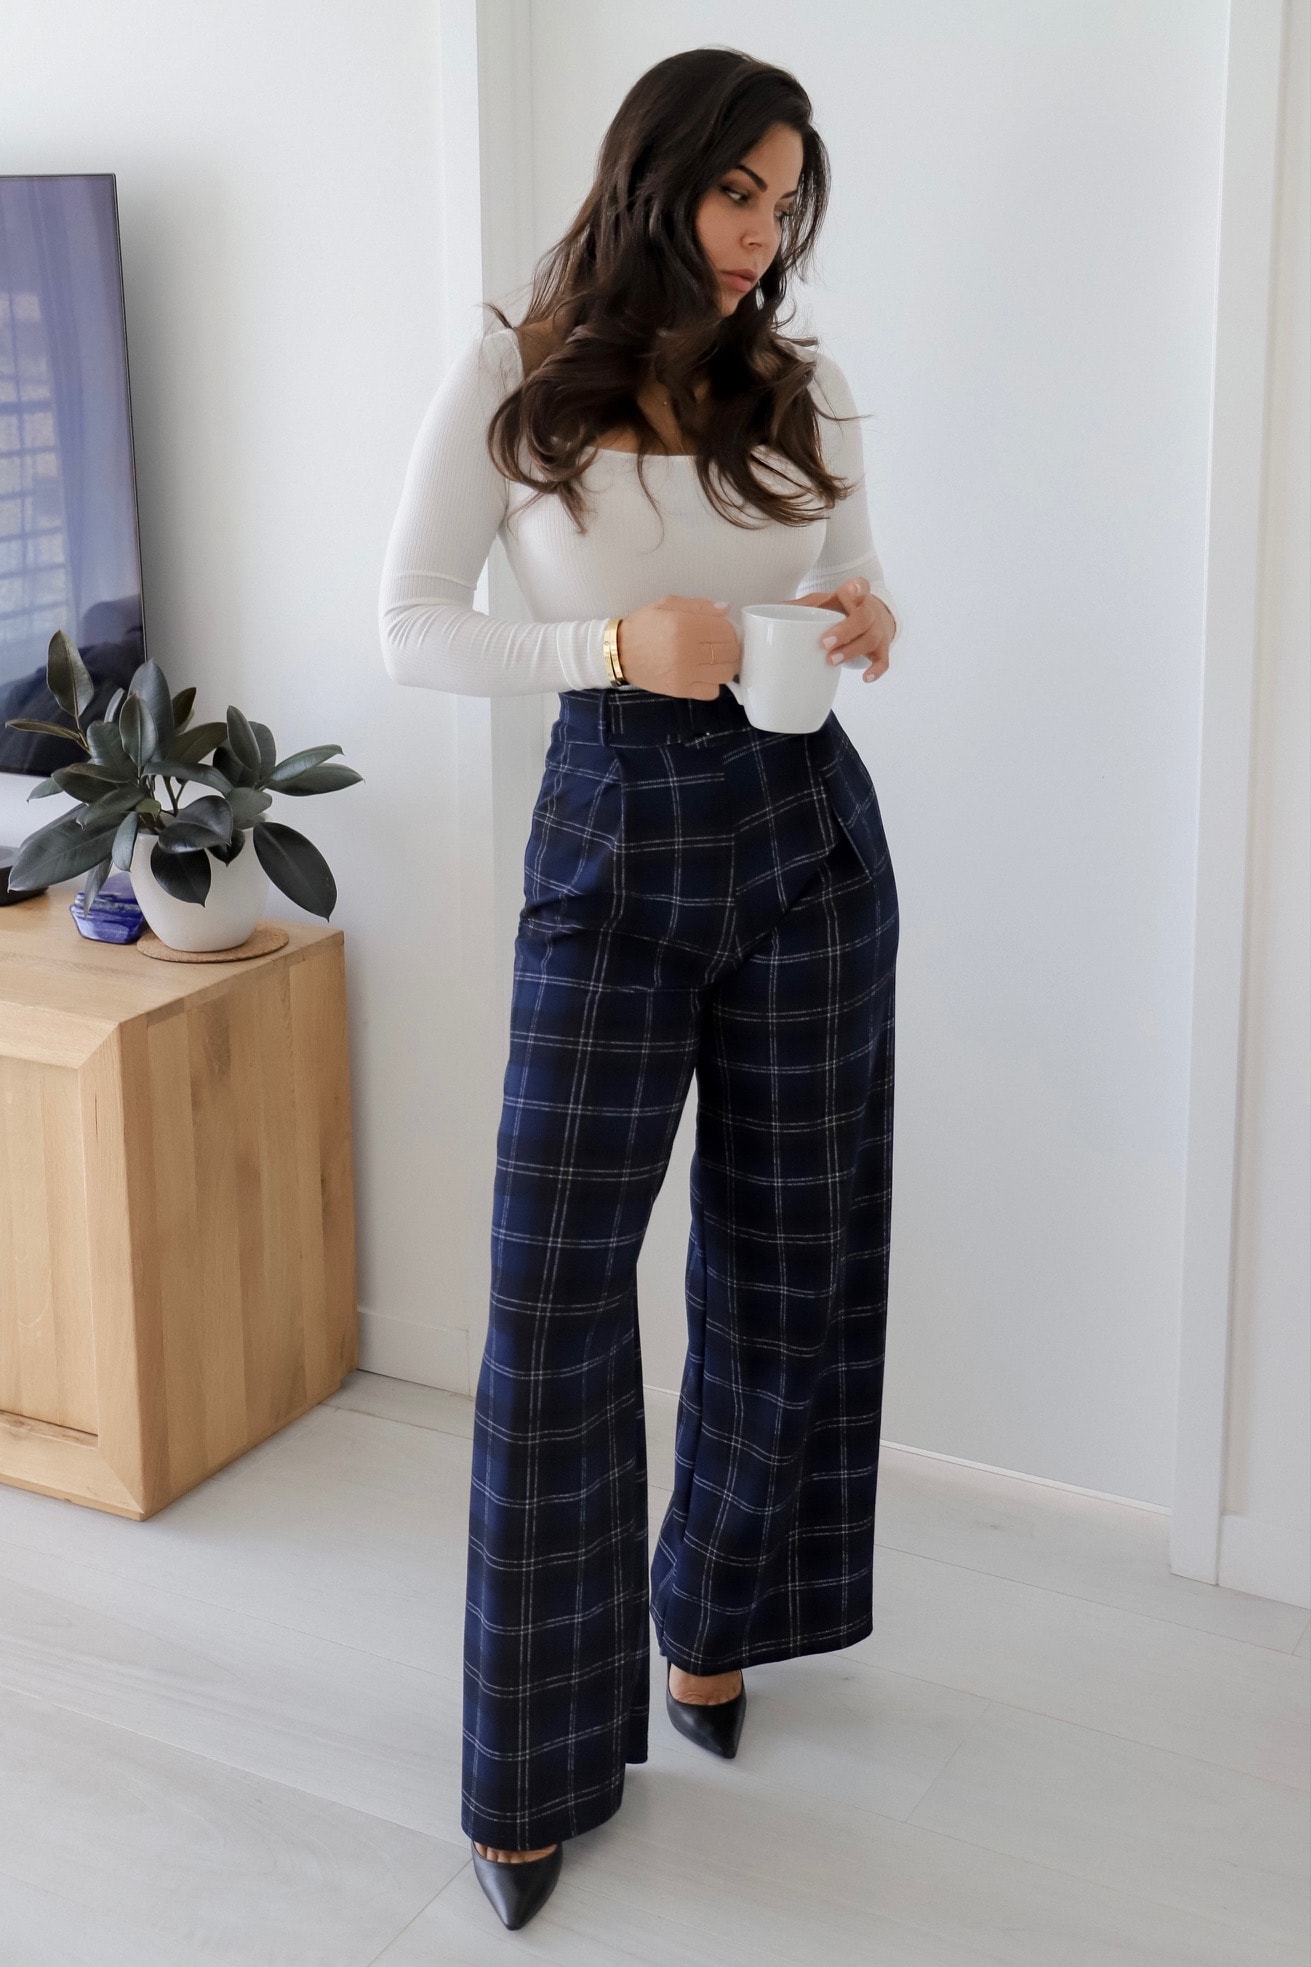 How To Style Plaid Pants